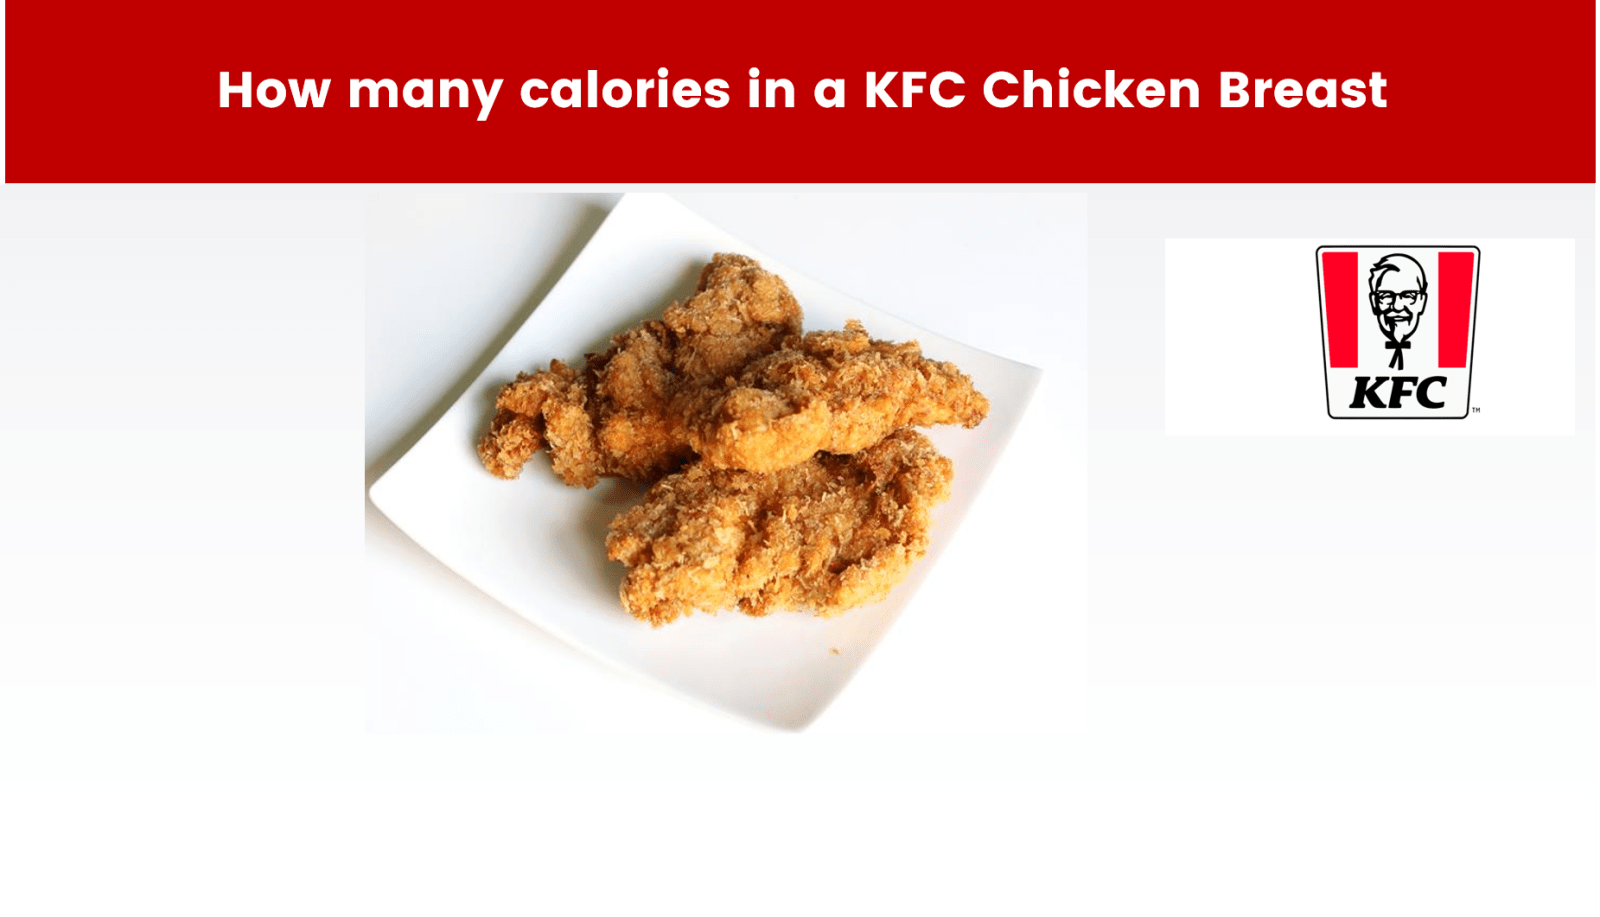 How many calories in a KFC Chicken Breast
